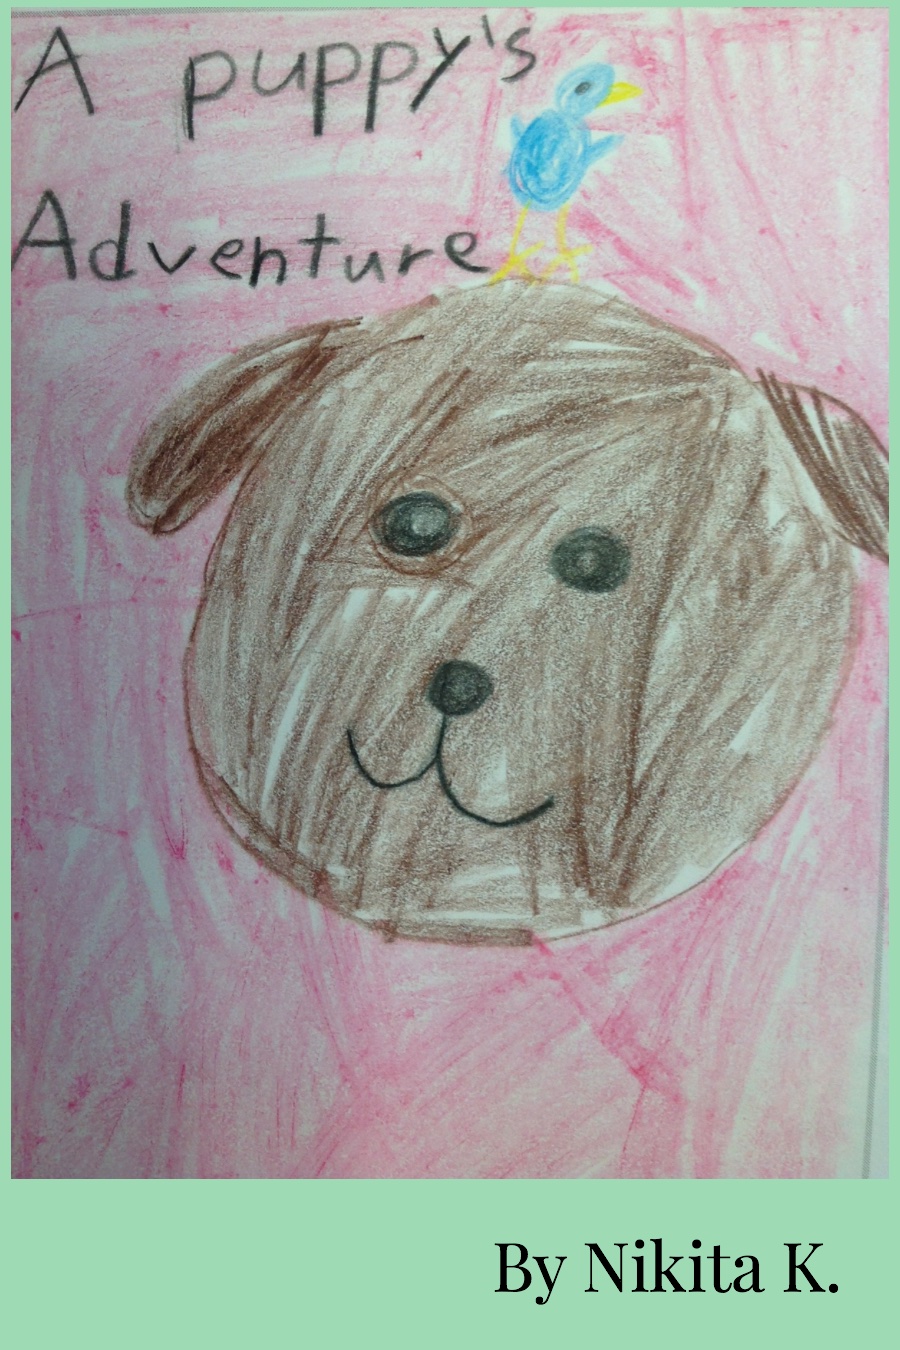 A Puppies Adventure by Nikita